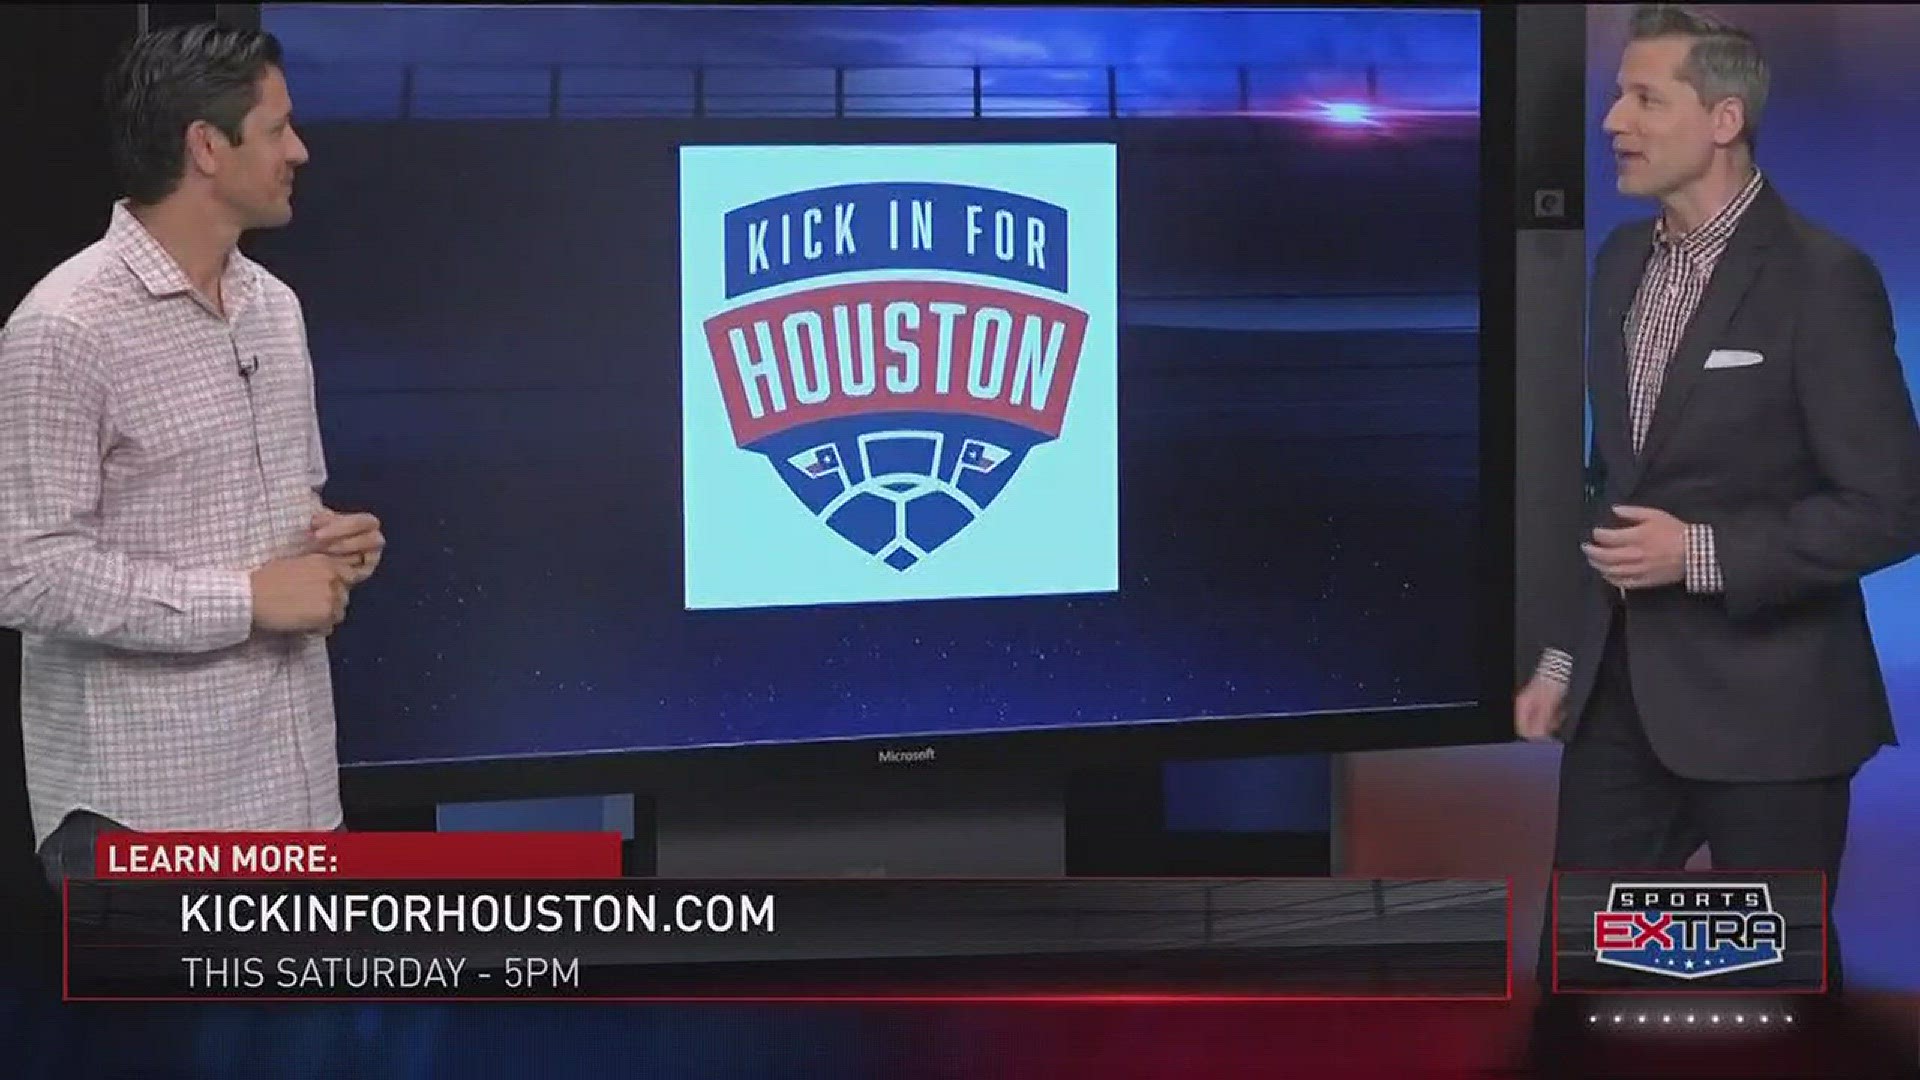 Brian Ching joins KHOU's Jason Bristol to talk about a fundraiser for Harvey relief featuring soccer stars like Clint Dempsey and Mia Hamm, and also other sports stars like Alex Bregman, Steve Nash and Chad Ochocinco.